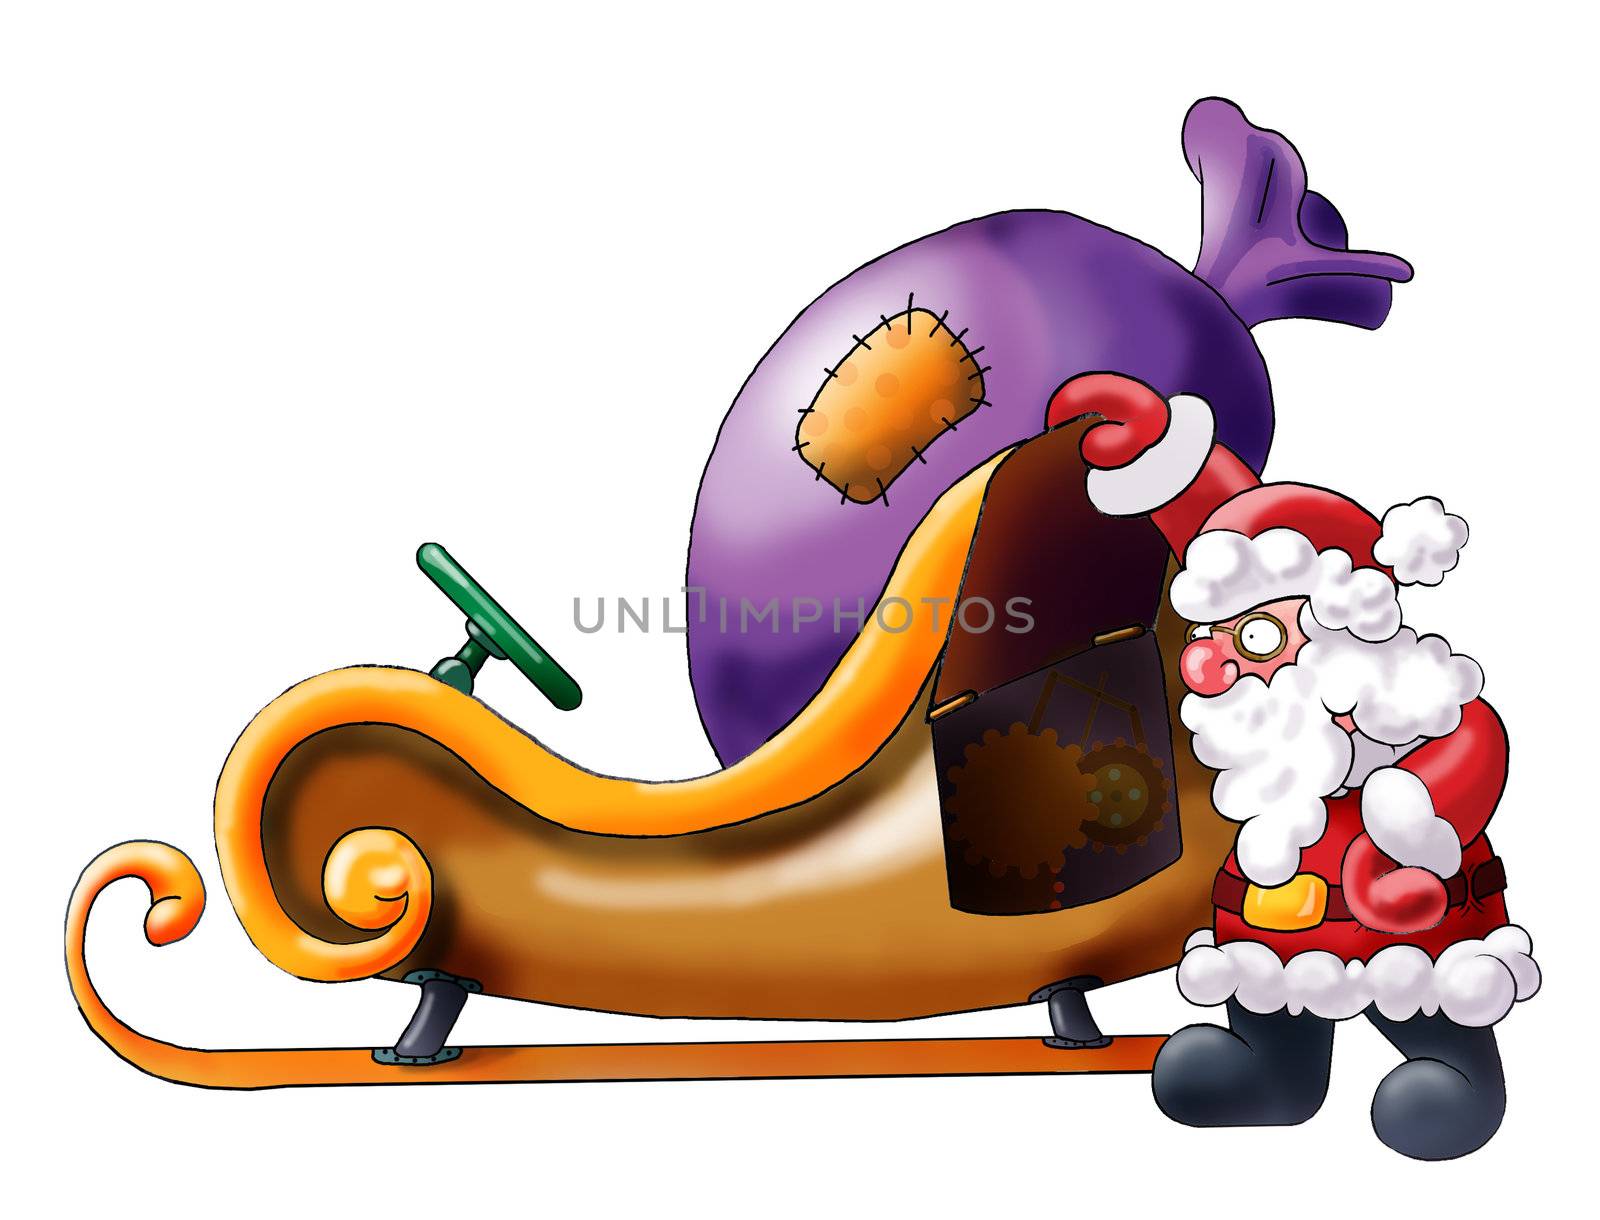 Santa Claus having a rest near his sledge by DOODNICK